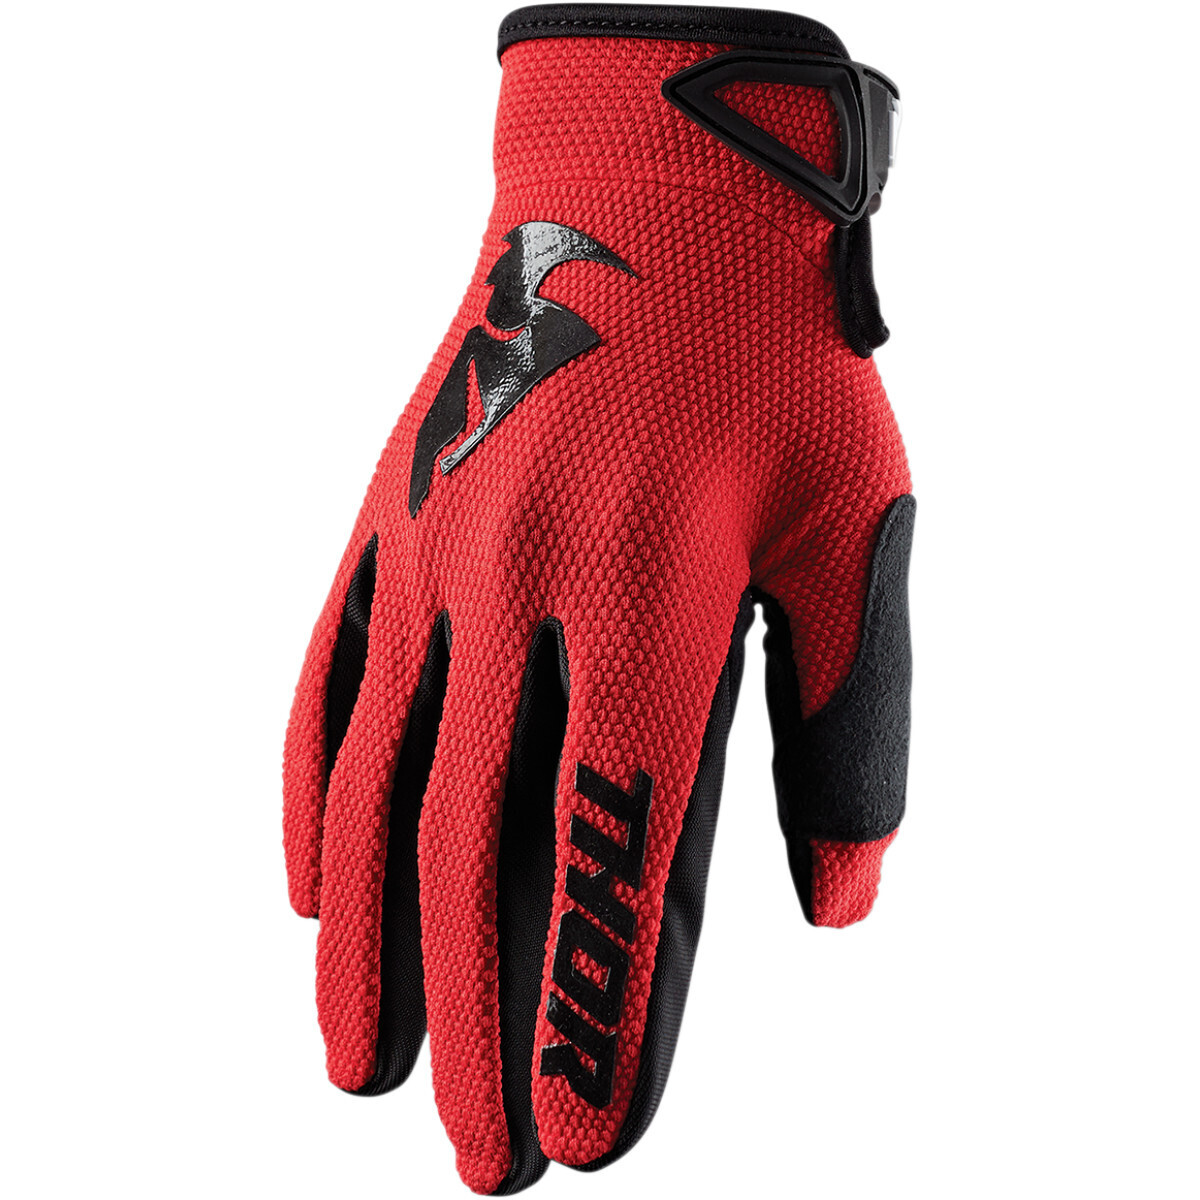 THOR
GLOVE S20 SECTOR RED